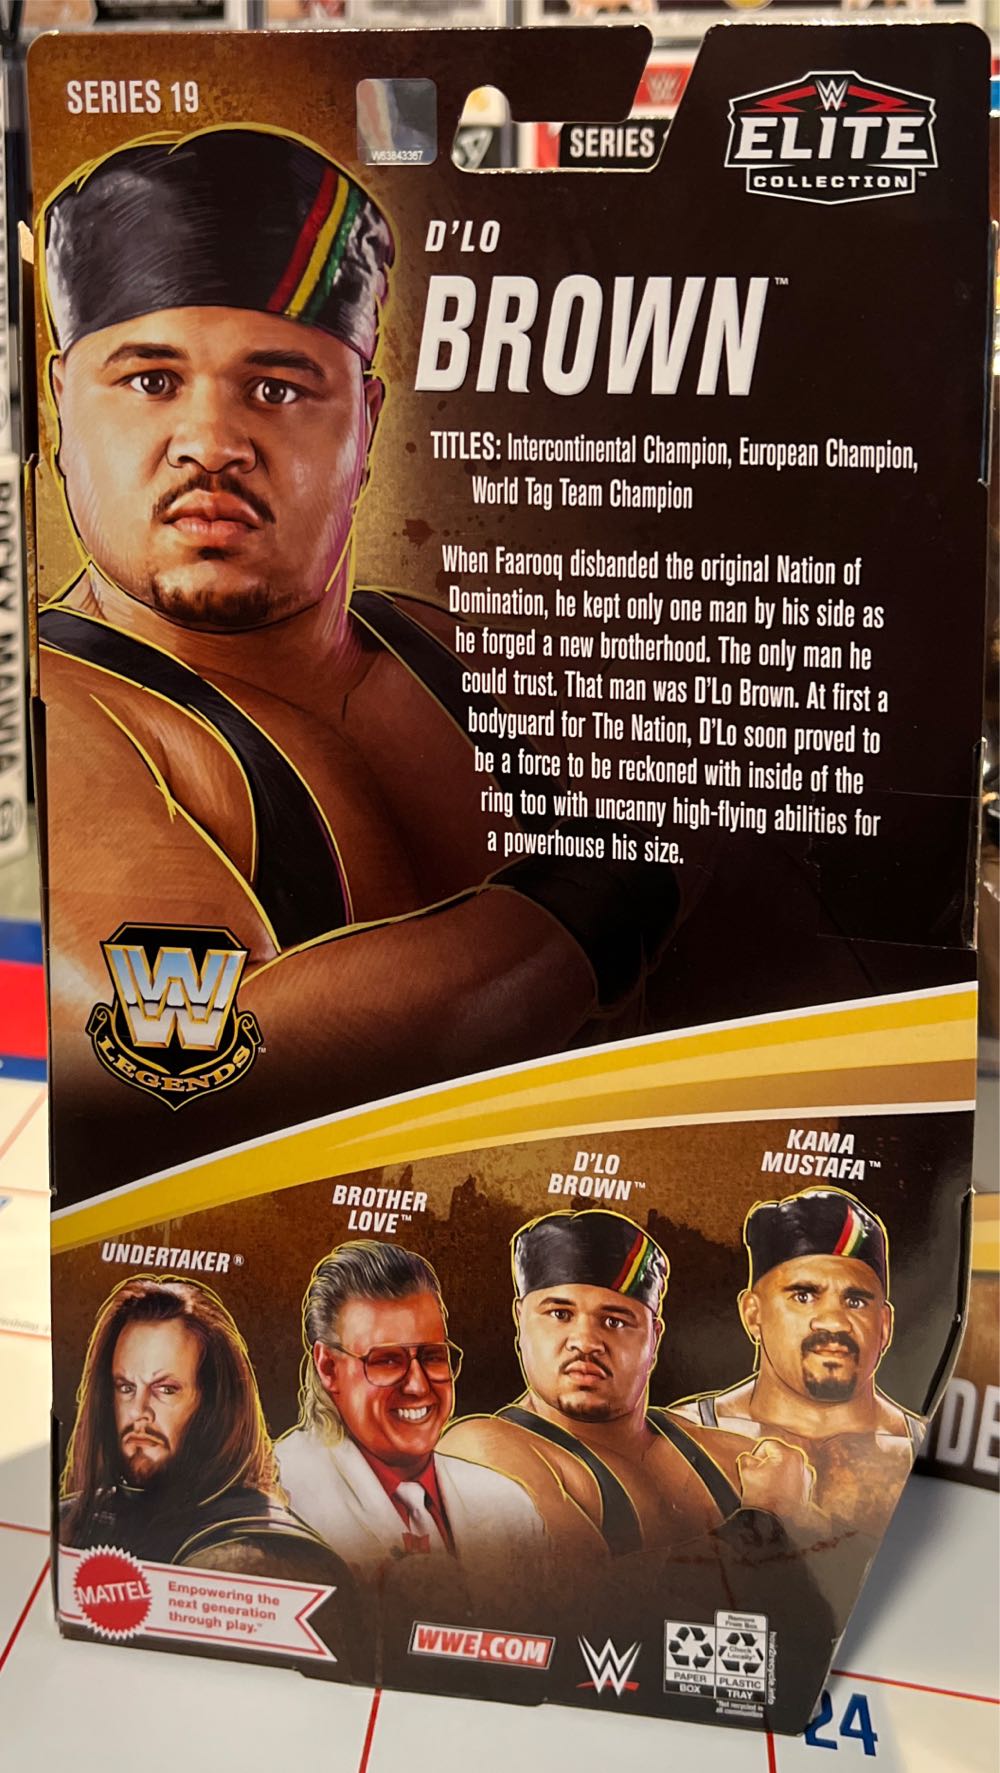 D’Lo Brown - Mattel Wwe (WWE) action figure collectible - Main Image 2